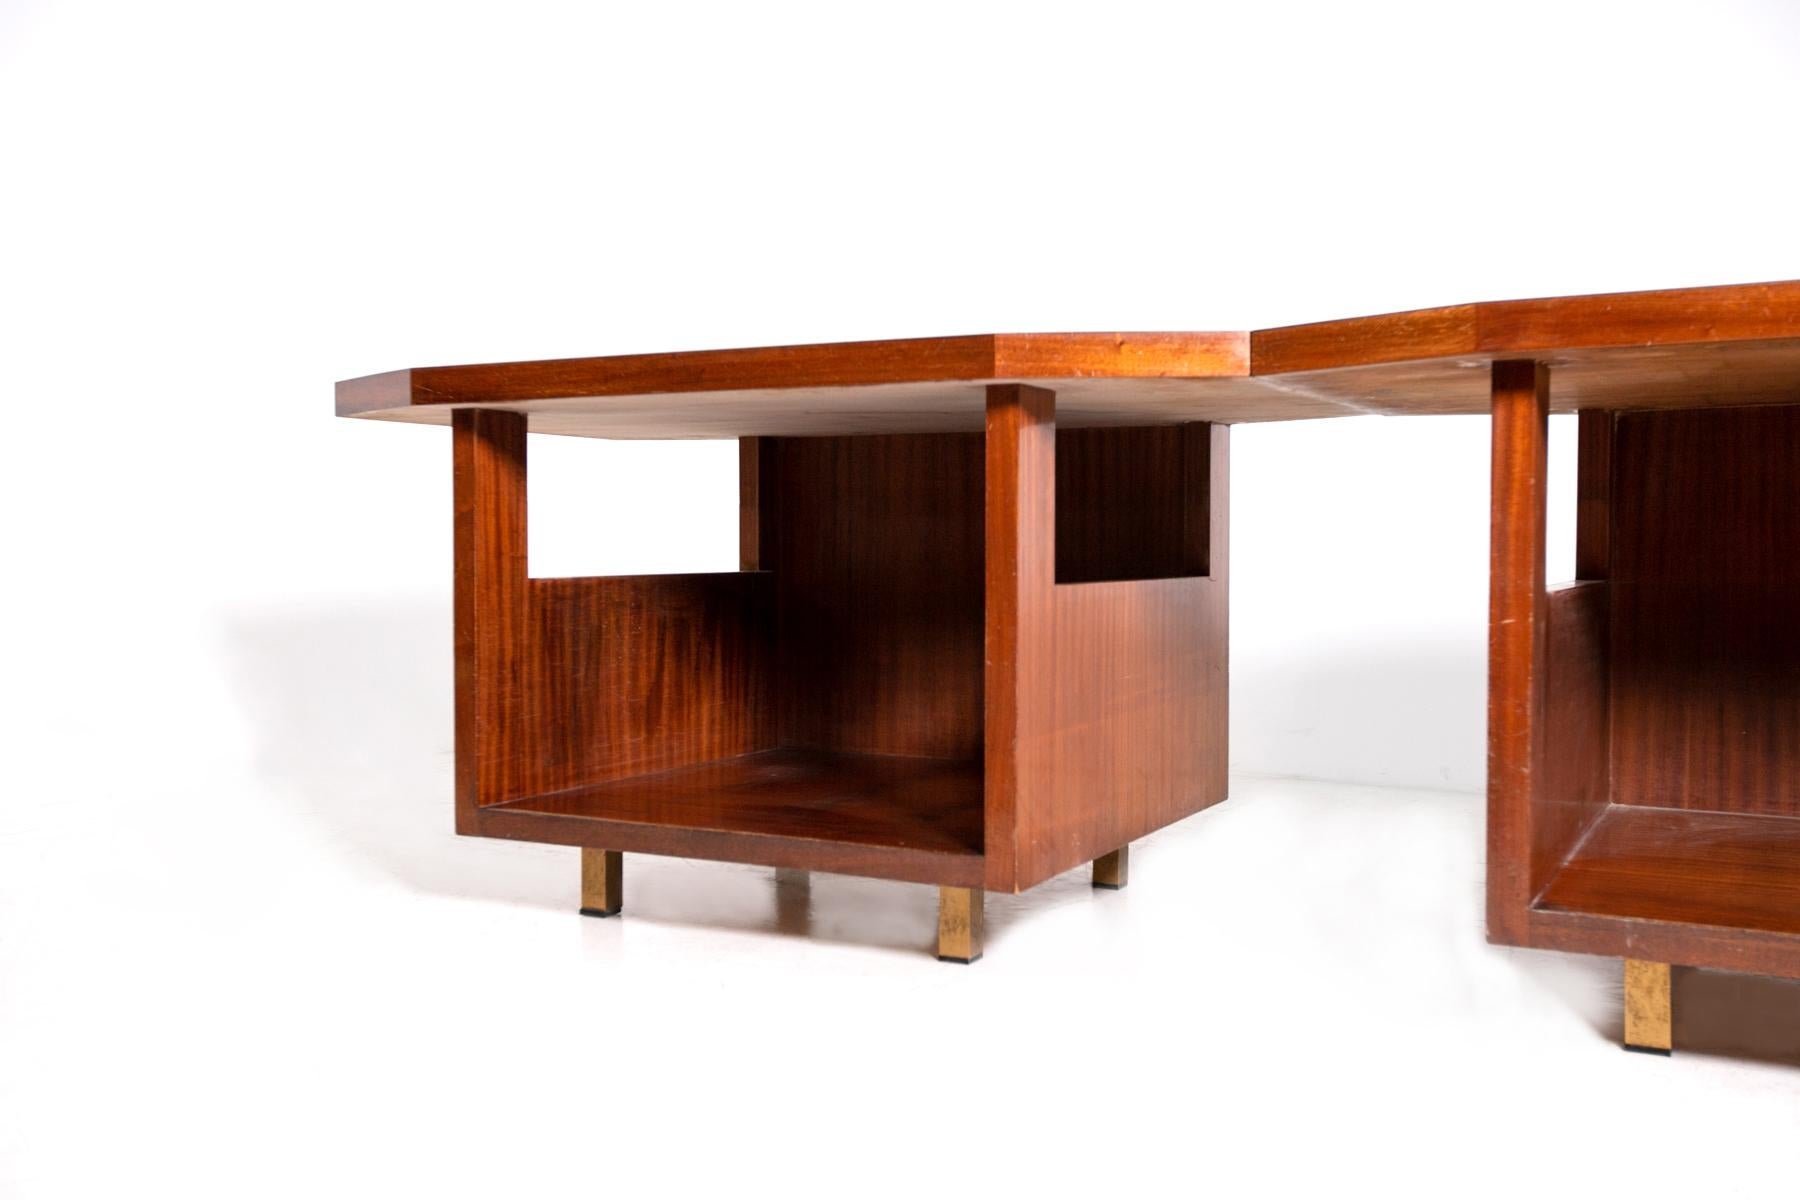 Mid-Century Modern Pair of Modular Consoles by Vito Sangirardi for Pallante Store, Bari Italy 1950s For Sale